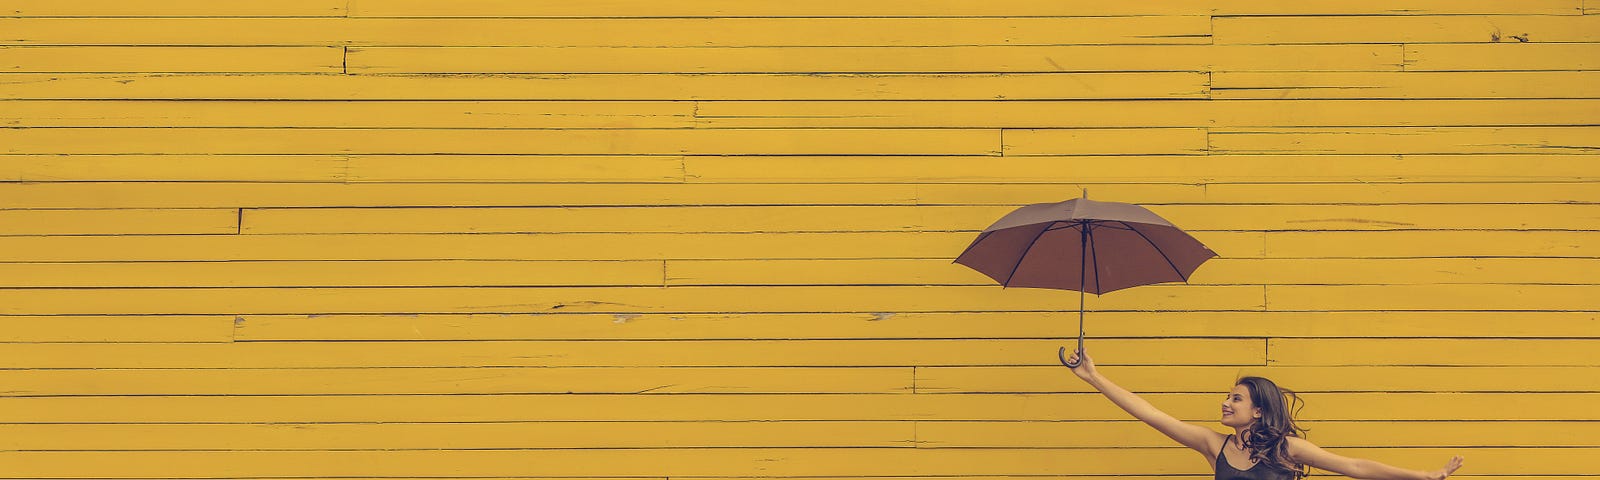 A girl holding an umbrella in front of a yellow wall